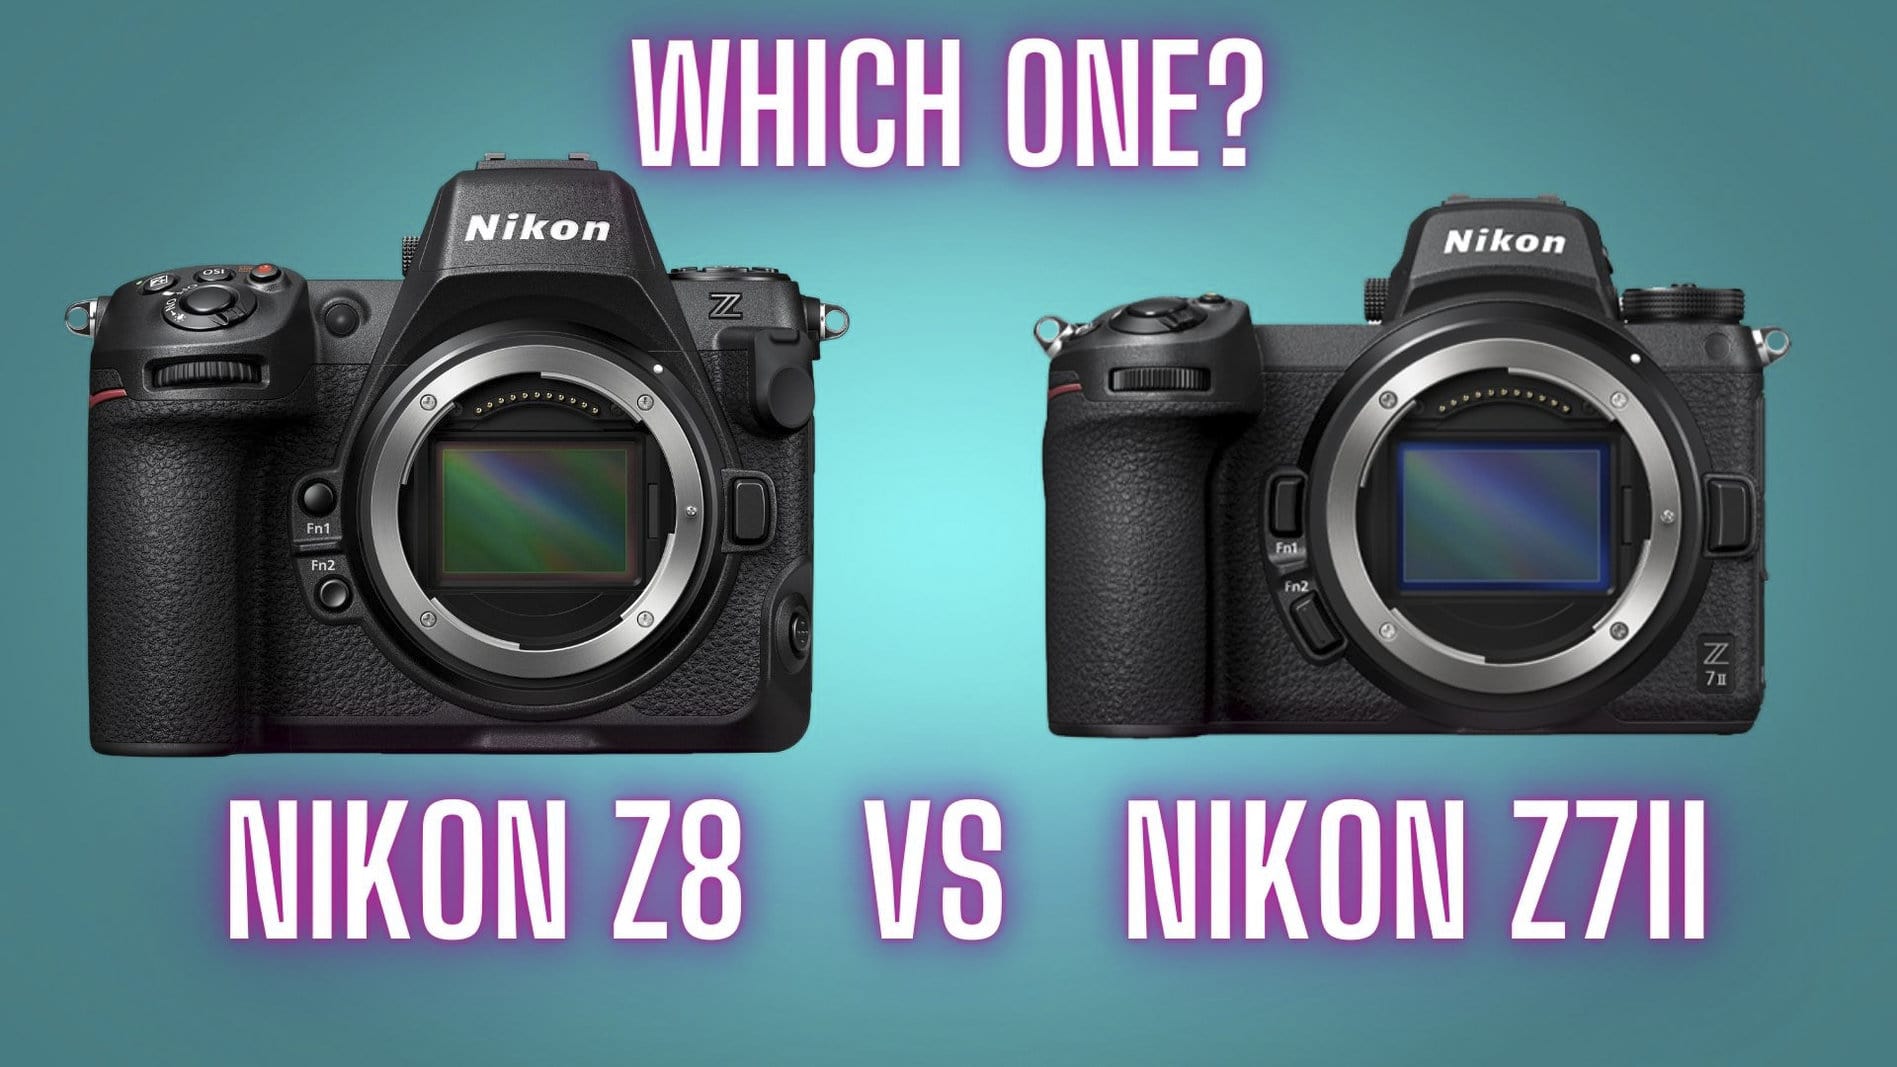 Nikon Z7ii vs Nikon Z8 which one is right for you?